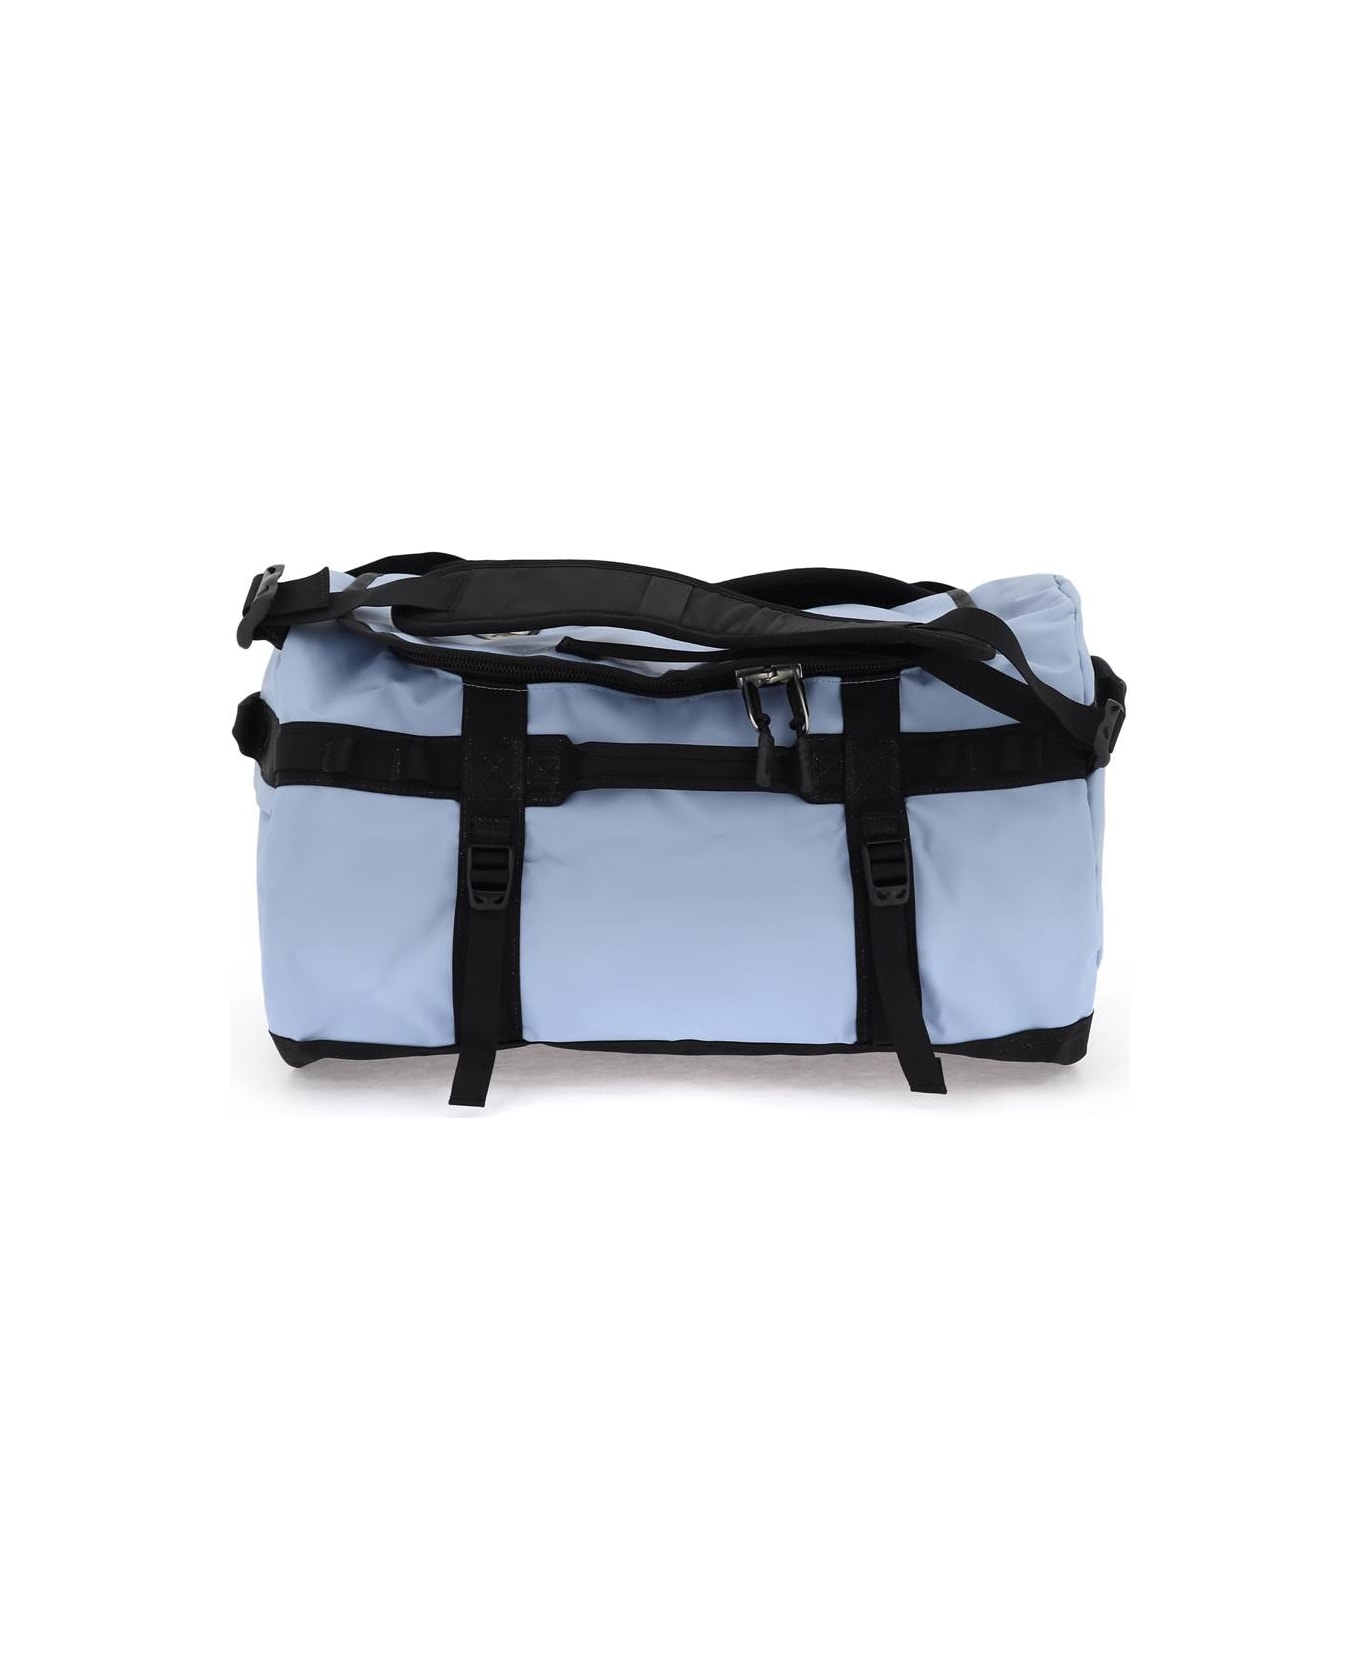 The North Face Small Base Camp Duffel Bag - STEEL BLUE TNF BLACK (Light blue) トラベルバッグ